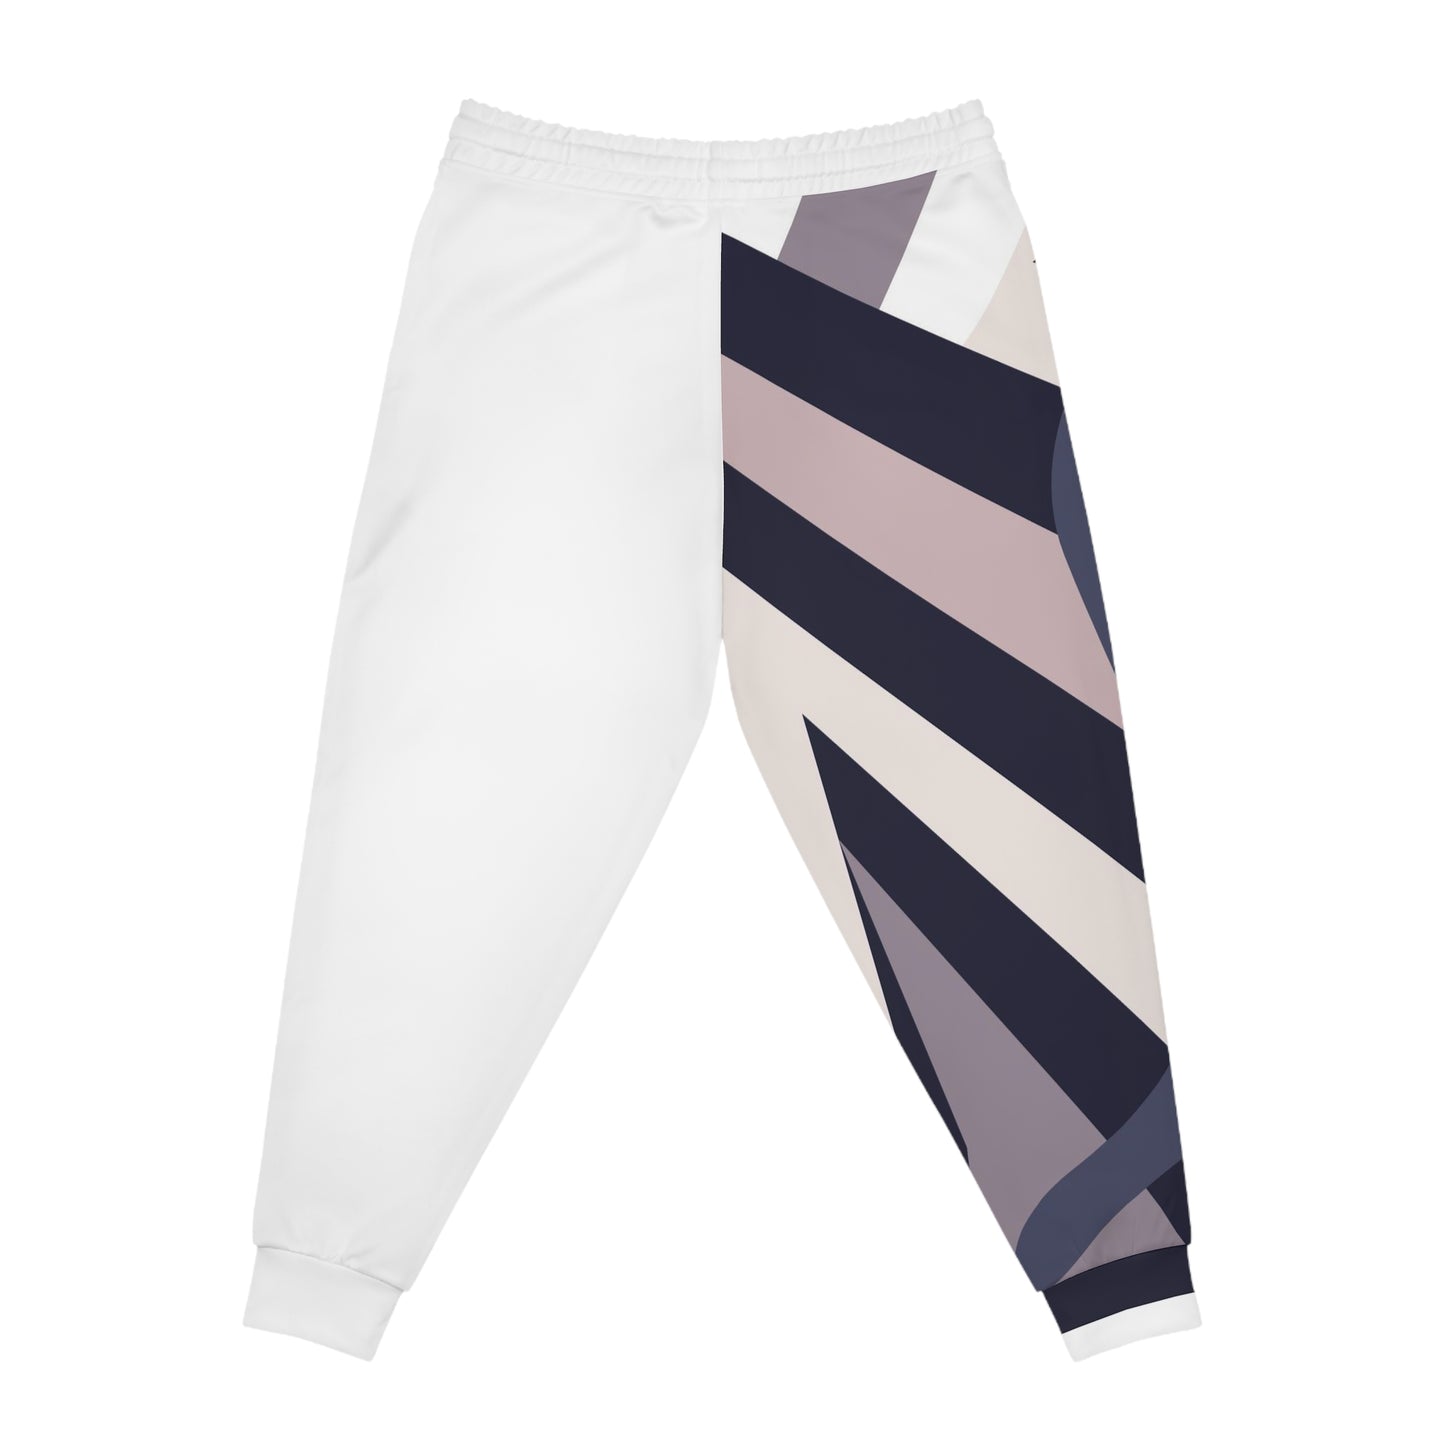 MINIMAL SHAPE 106 - Athletic Joggers RIGHT SIDED (AOP)